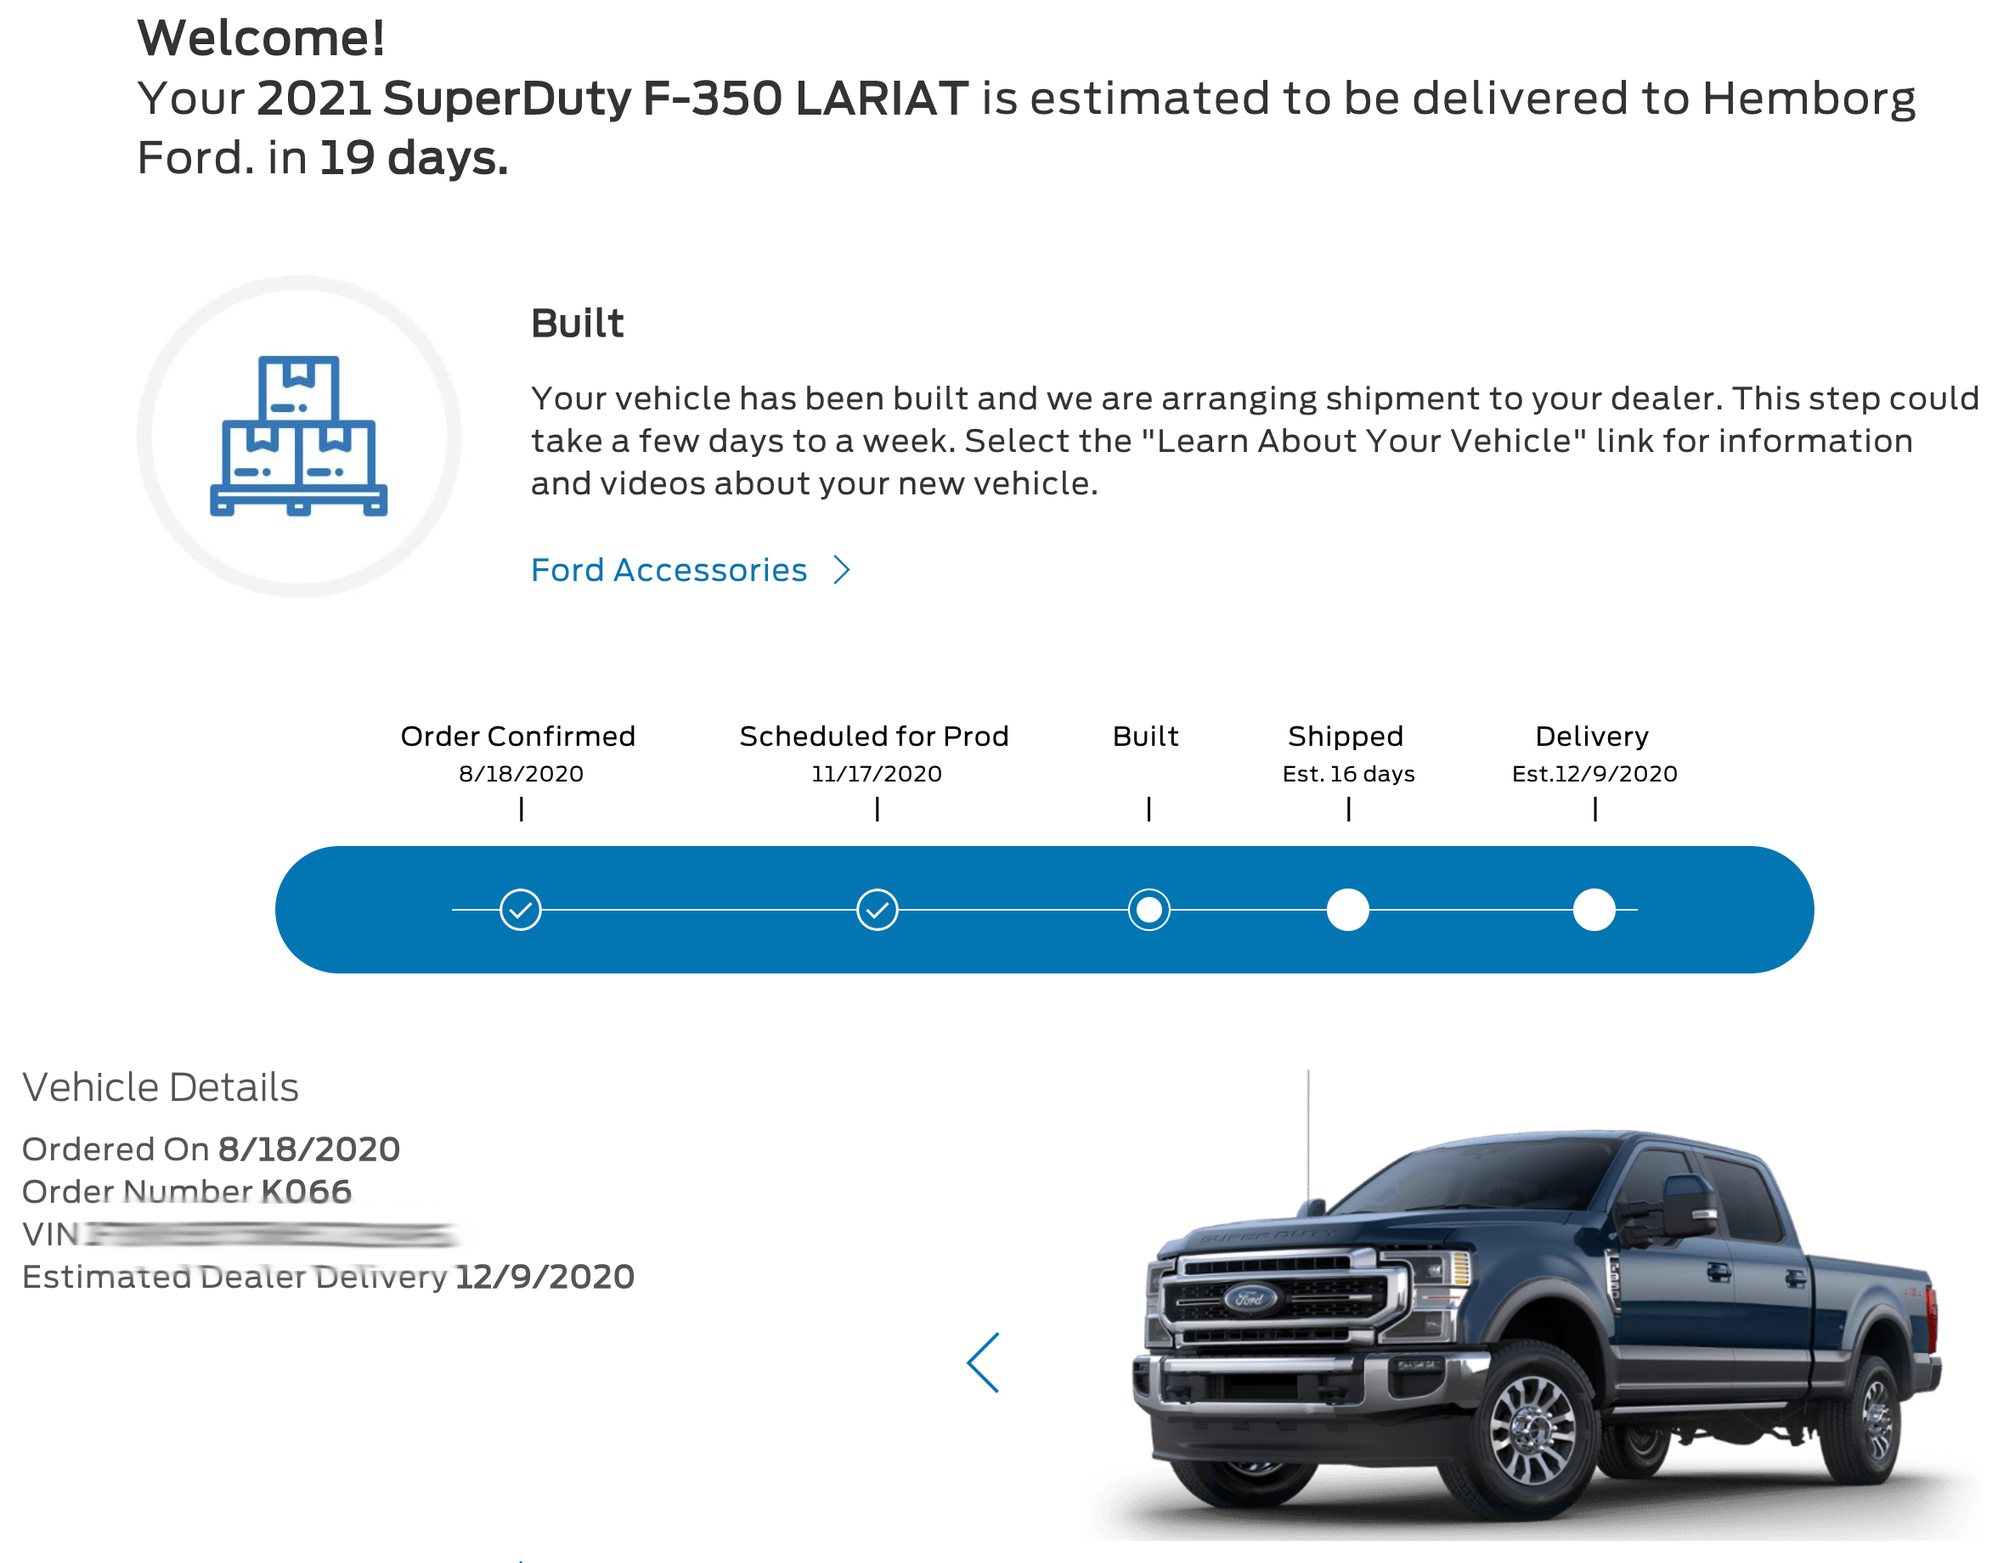 2021 Ford Super Duty Order Tracking Thread. Please NO Off Topic - Page